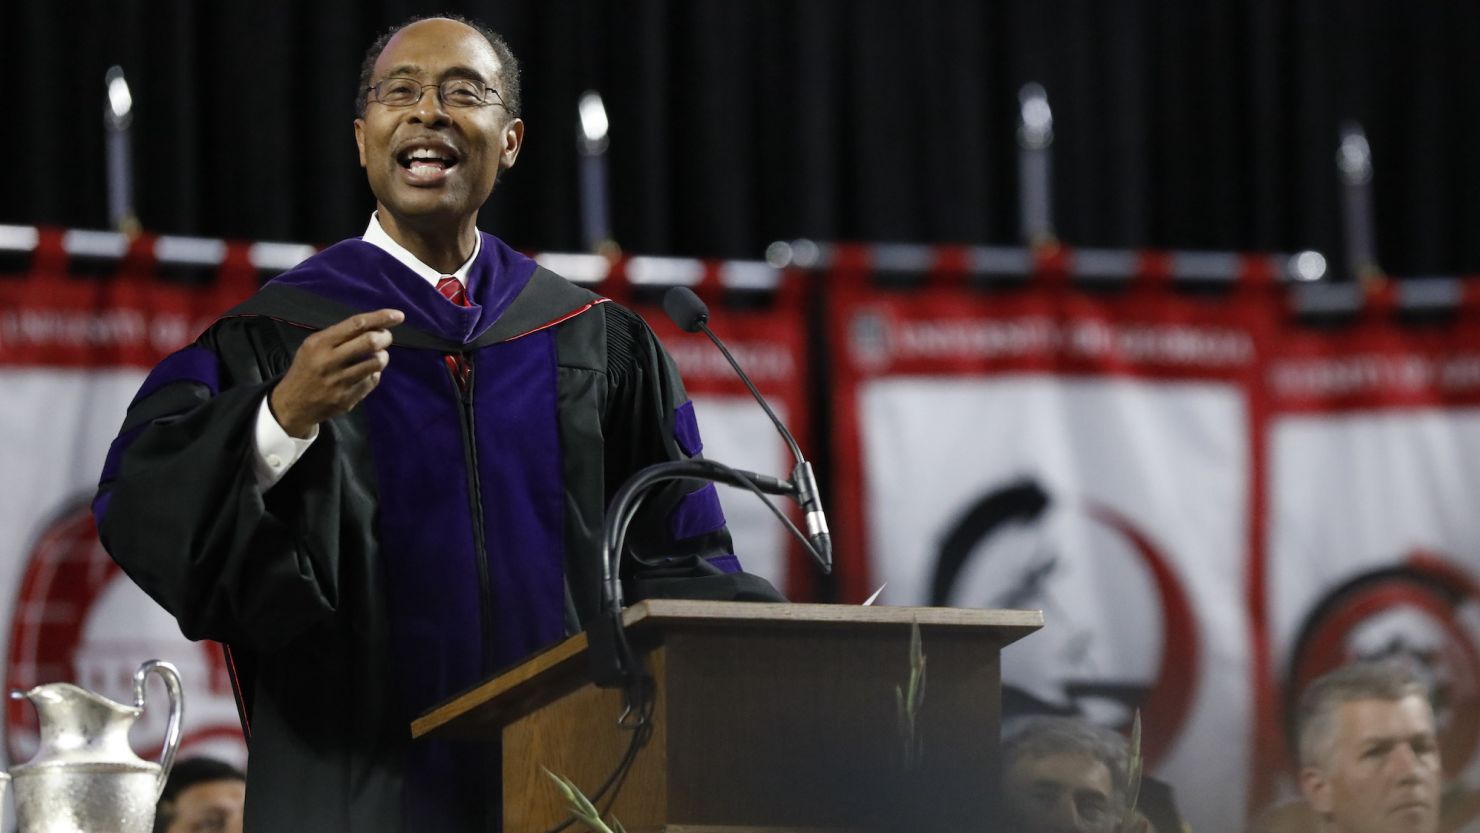 Judge Steve Jones gives the commencement address at the University of Georgia's fall commencement in Athens, Georgia, in 2018.